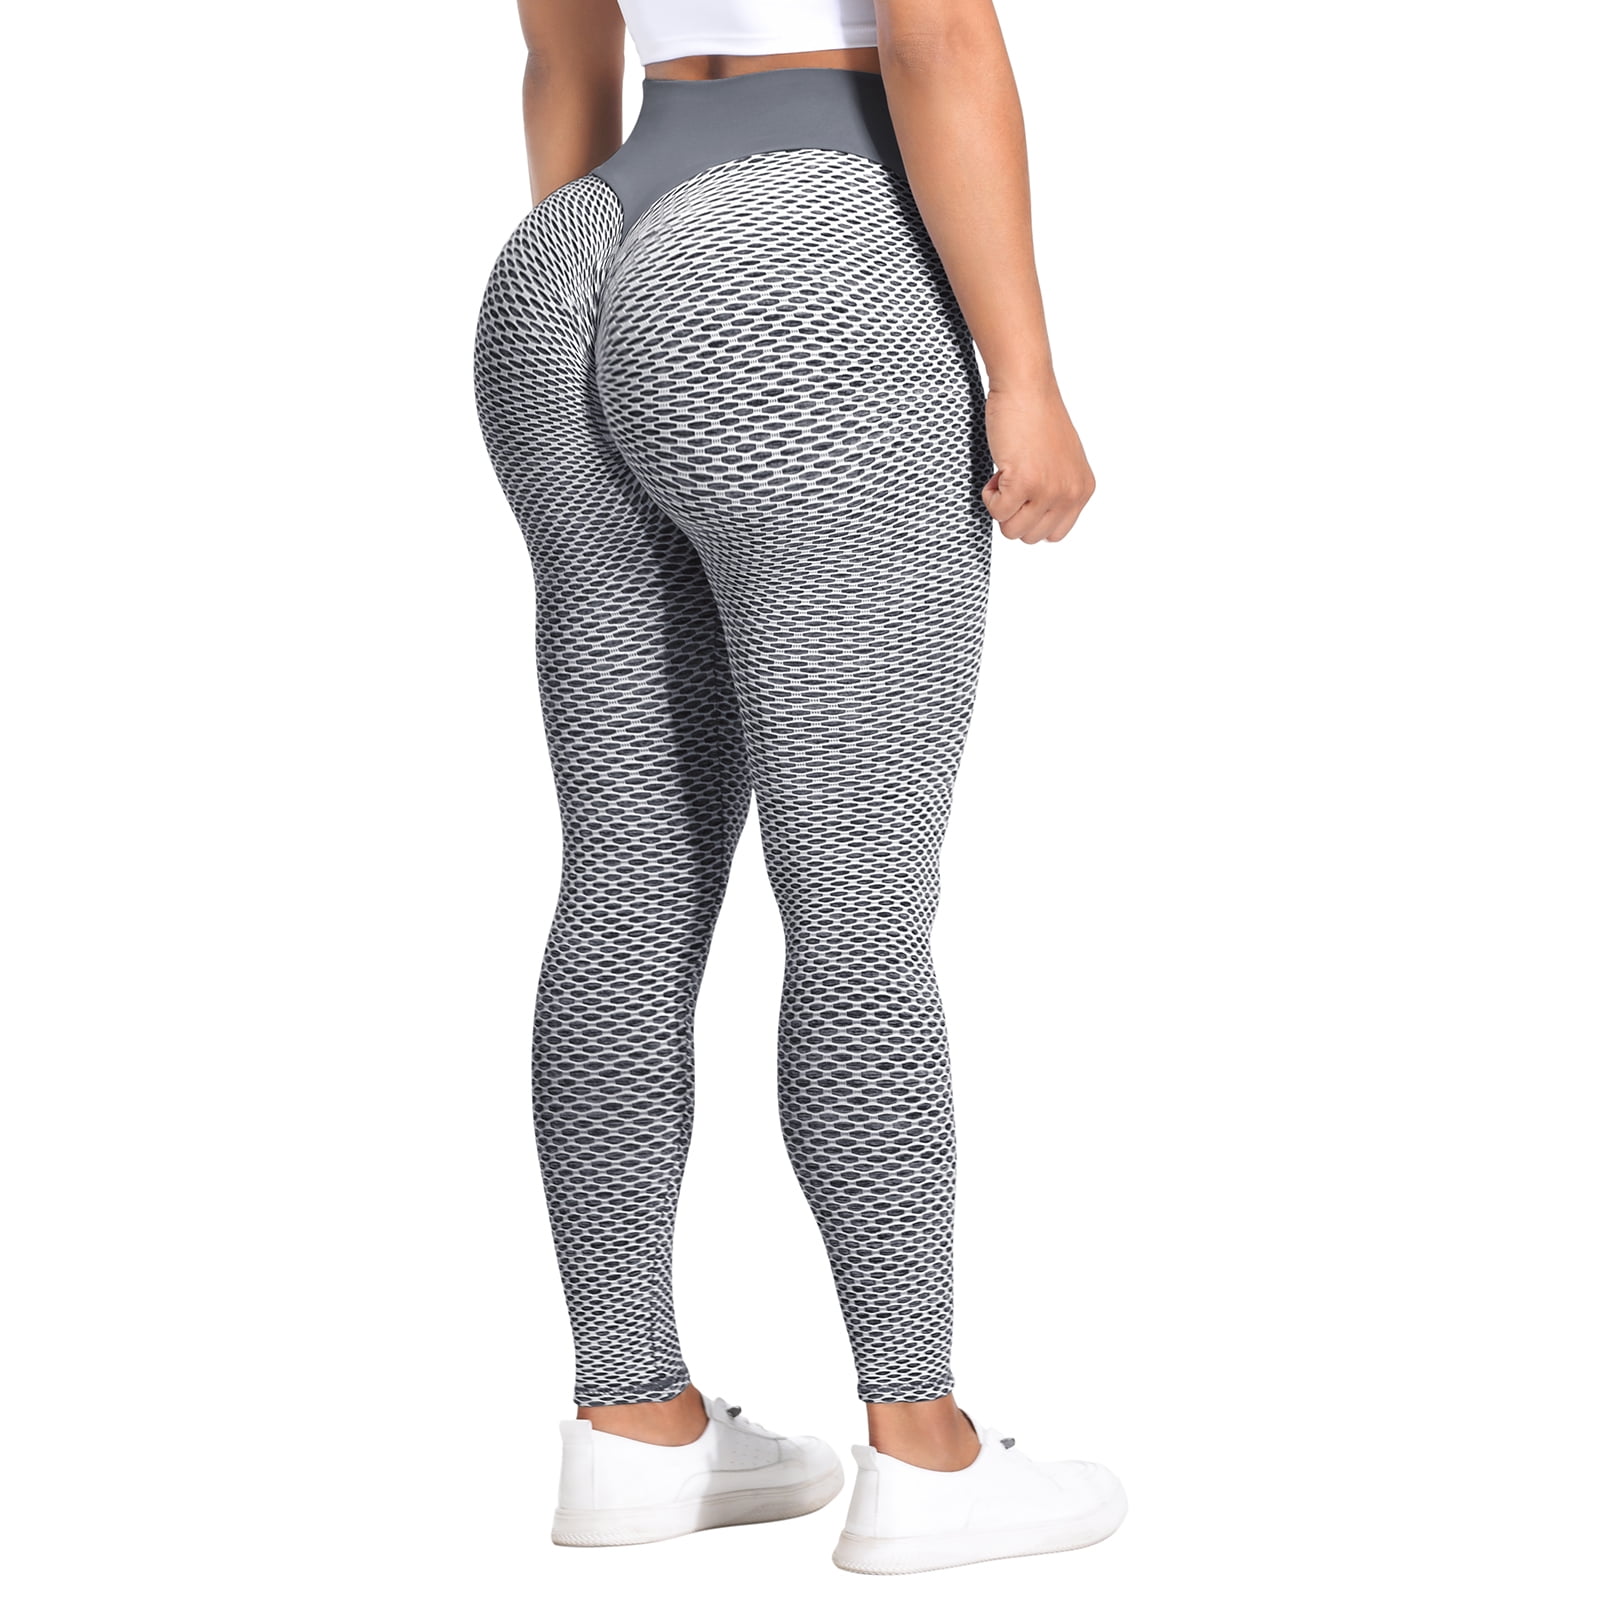 Women's Yoga Pants with Pockets - LETSFIT ES9 Leggings with Pockets, High  Waist Tummy Control Non-See-Through Workout Pants for Yoga Running -  Walmart.com